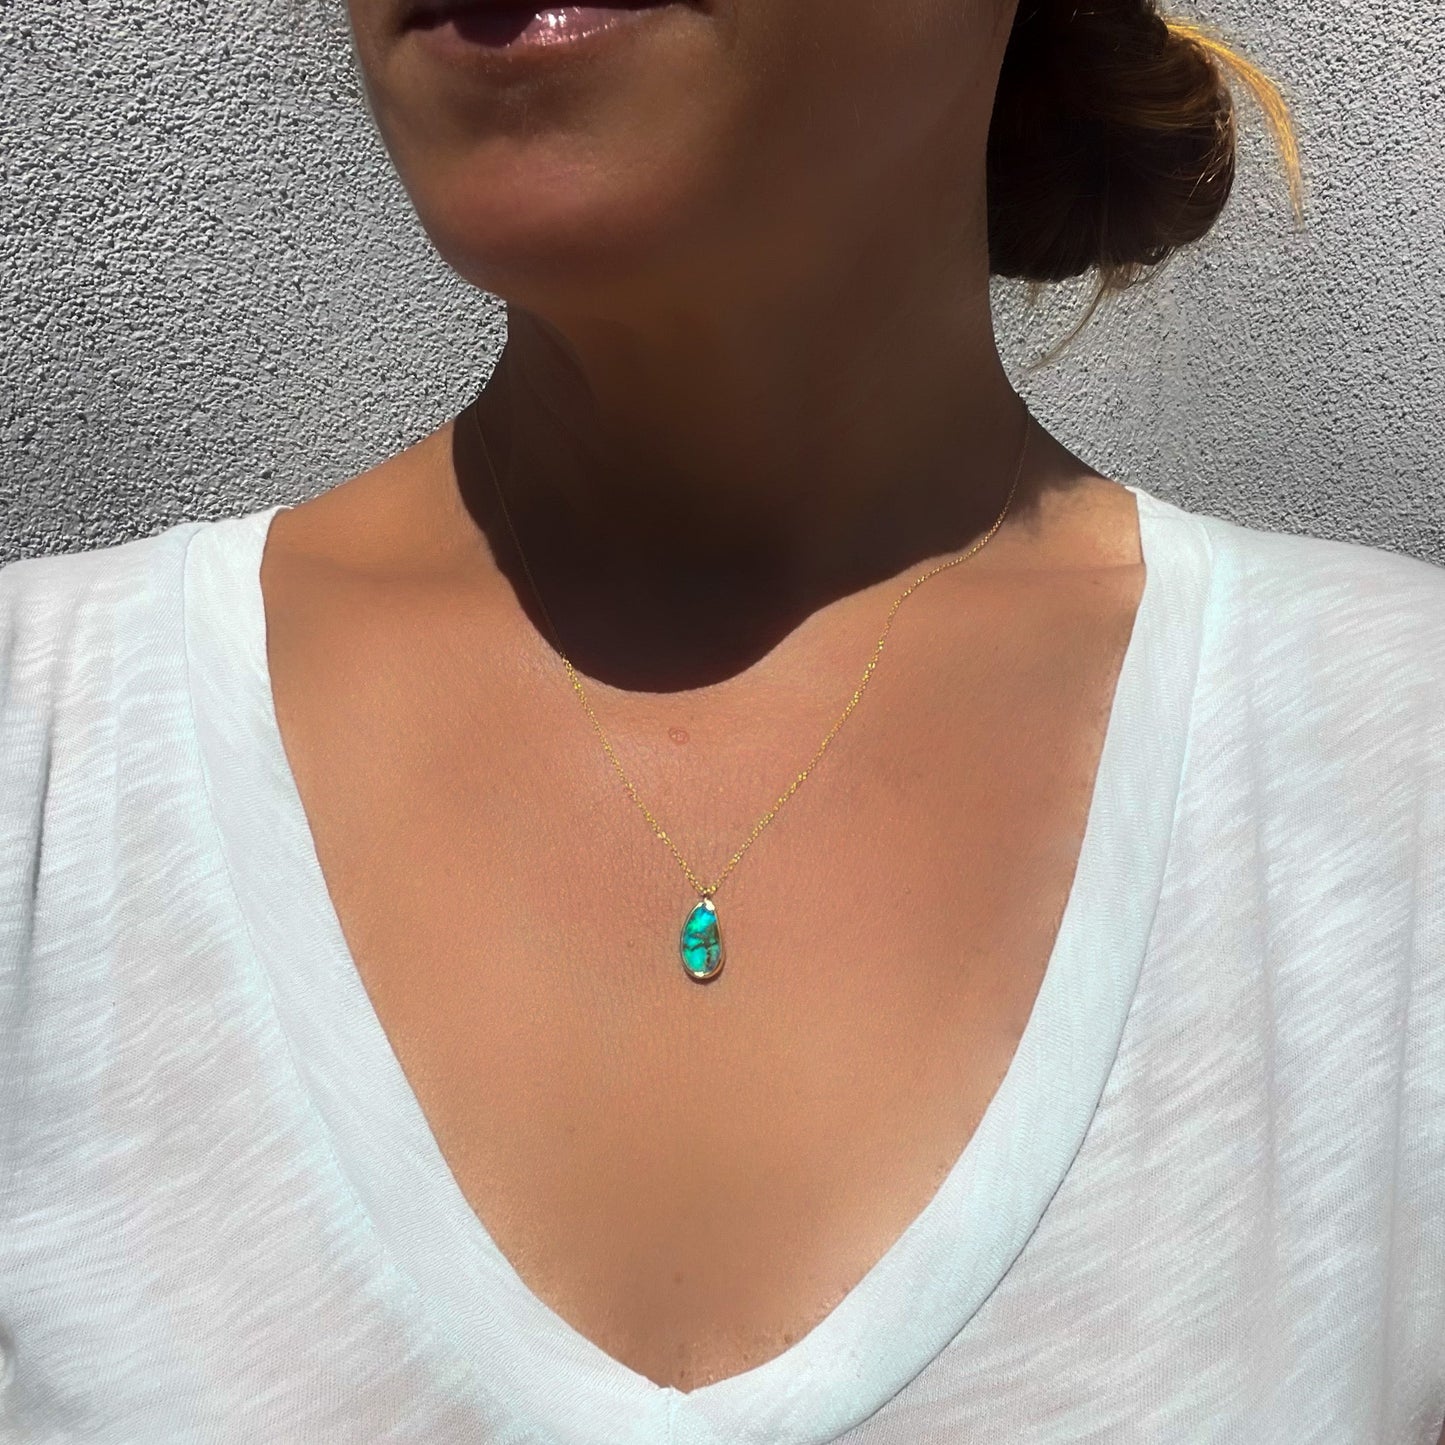 An Australian Opal Necklace by NIXIN Jewelry worn by a model to show scale. The opal pendant is locally made and is among the handcrafted jewelry we offer at NIXIN.